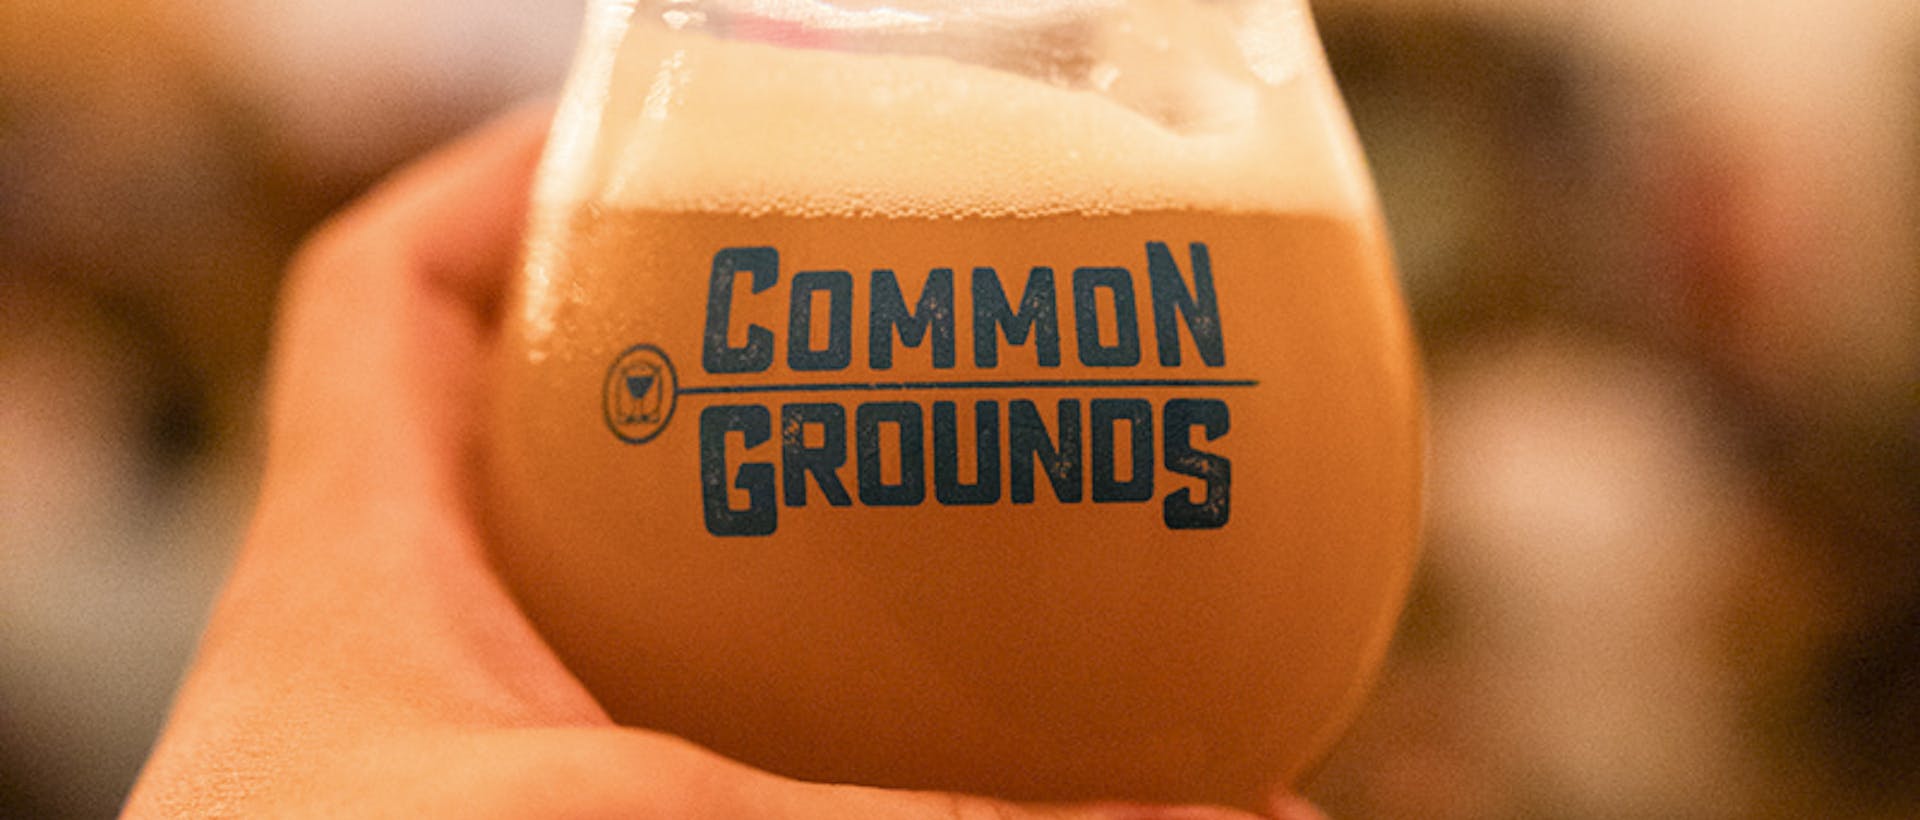 Commonwealth Brewing Company